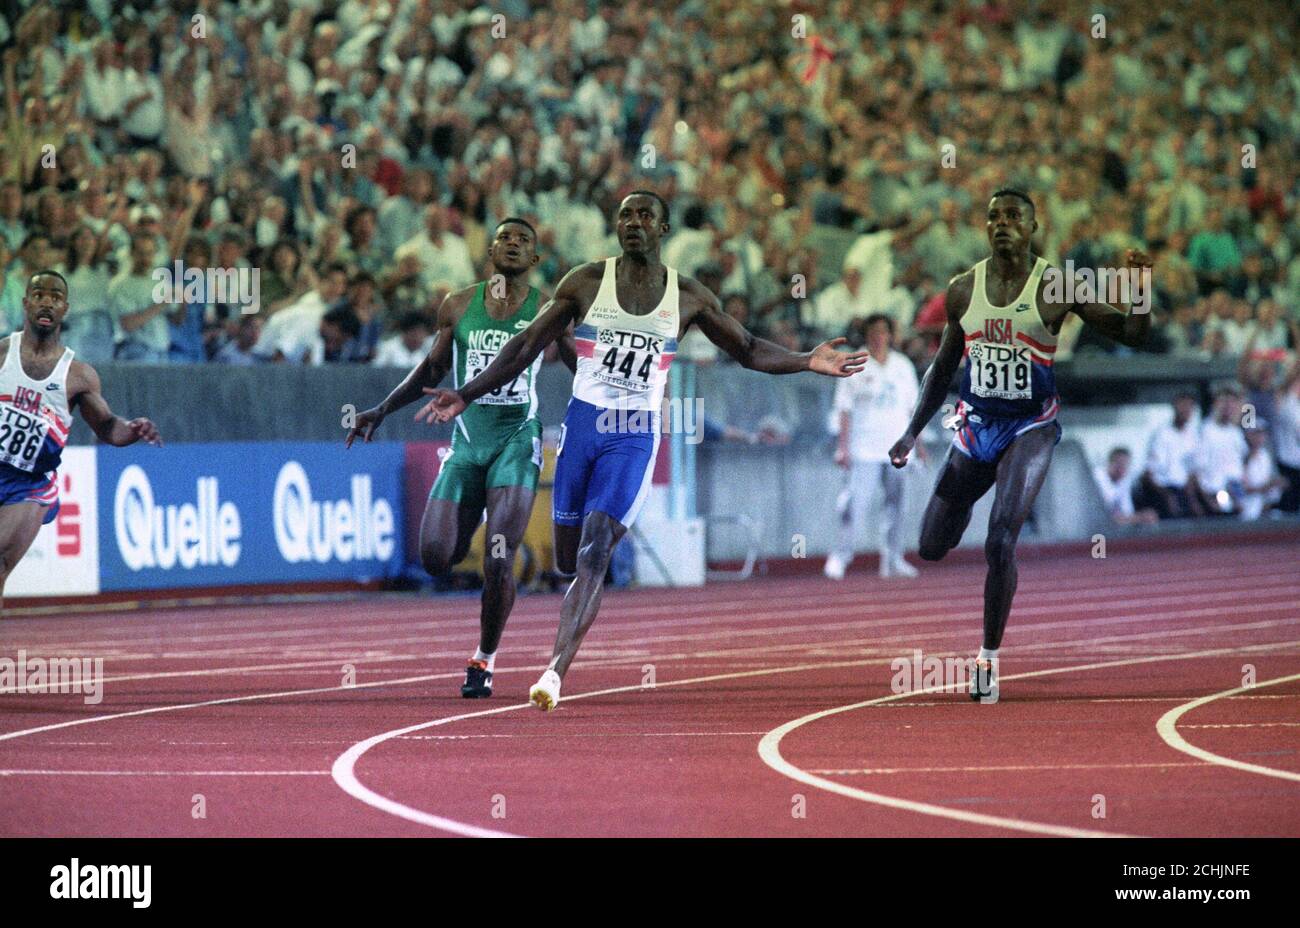 Linford Christie takes a corner in Heat ahead of Carl Lewis in Stuttgart during the World Championships. Stock Photo